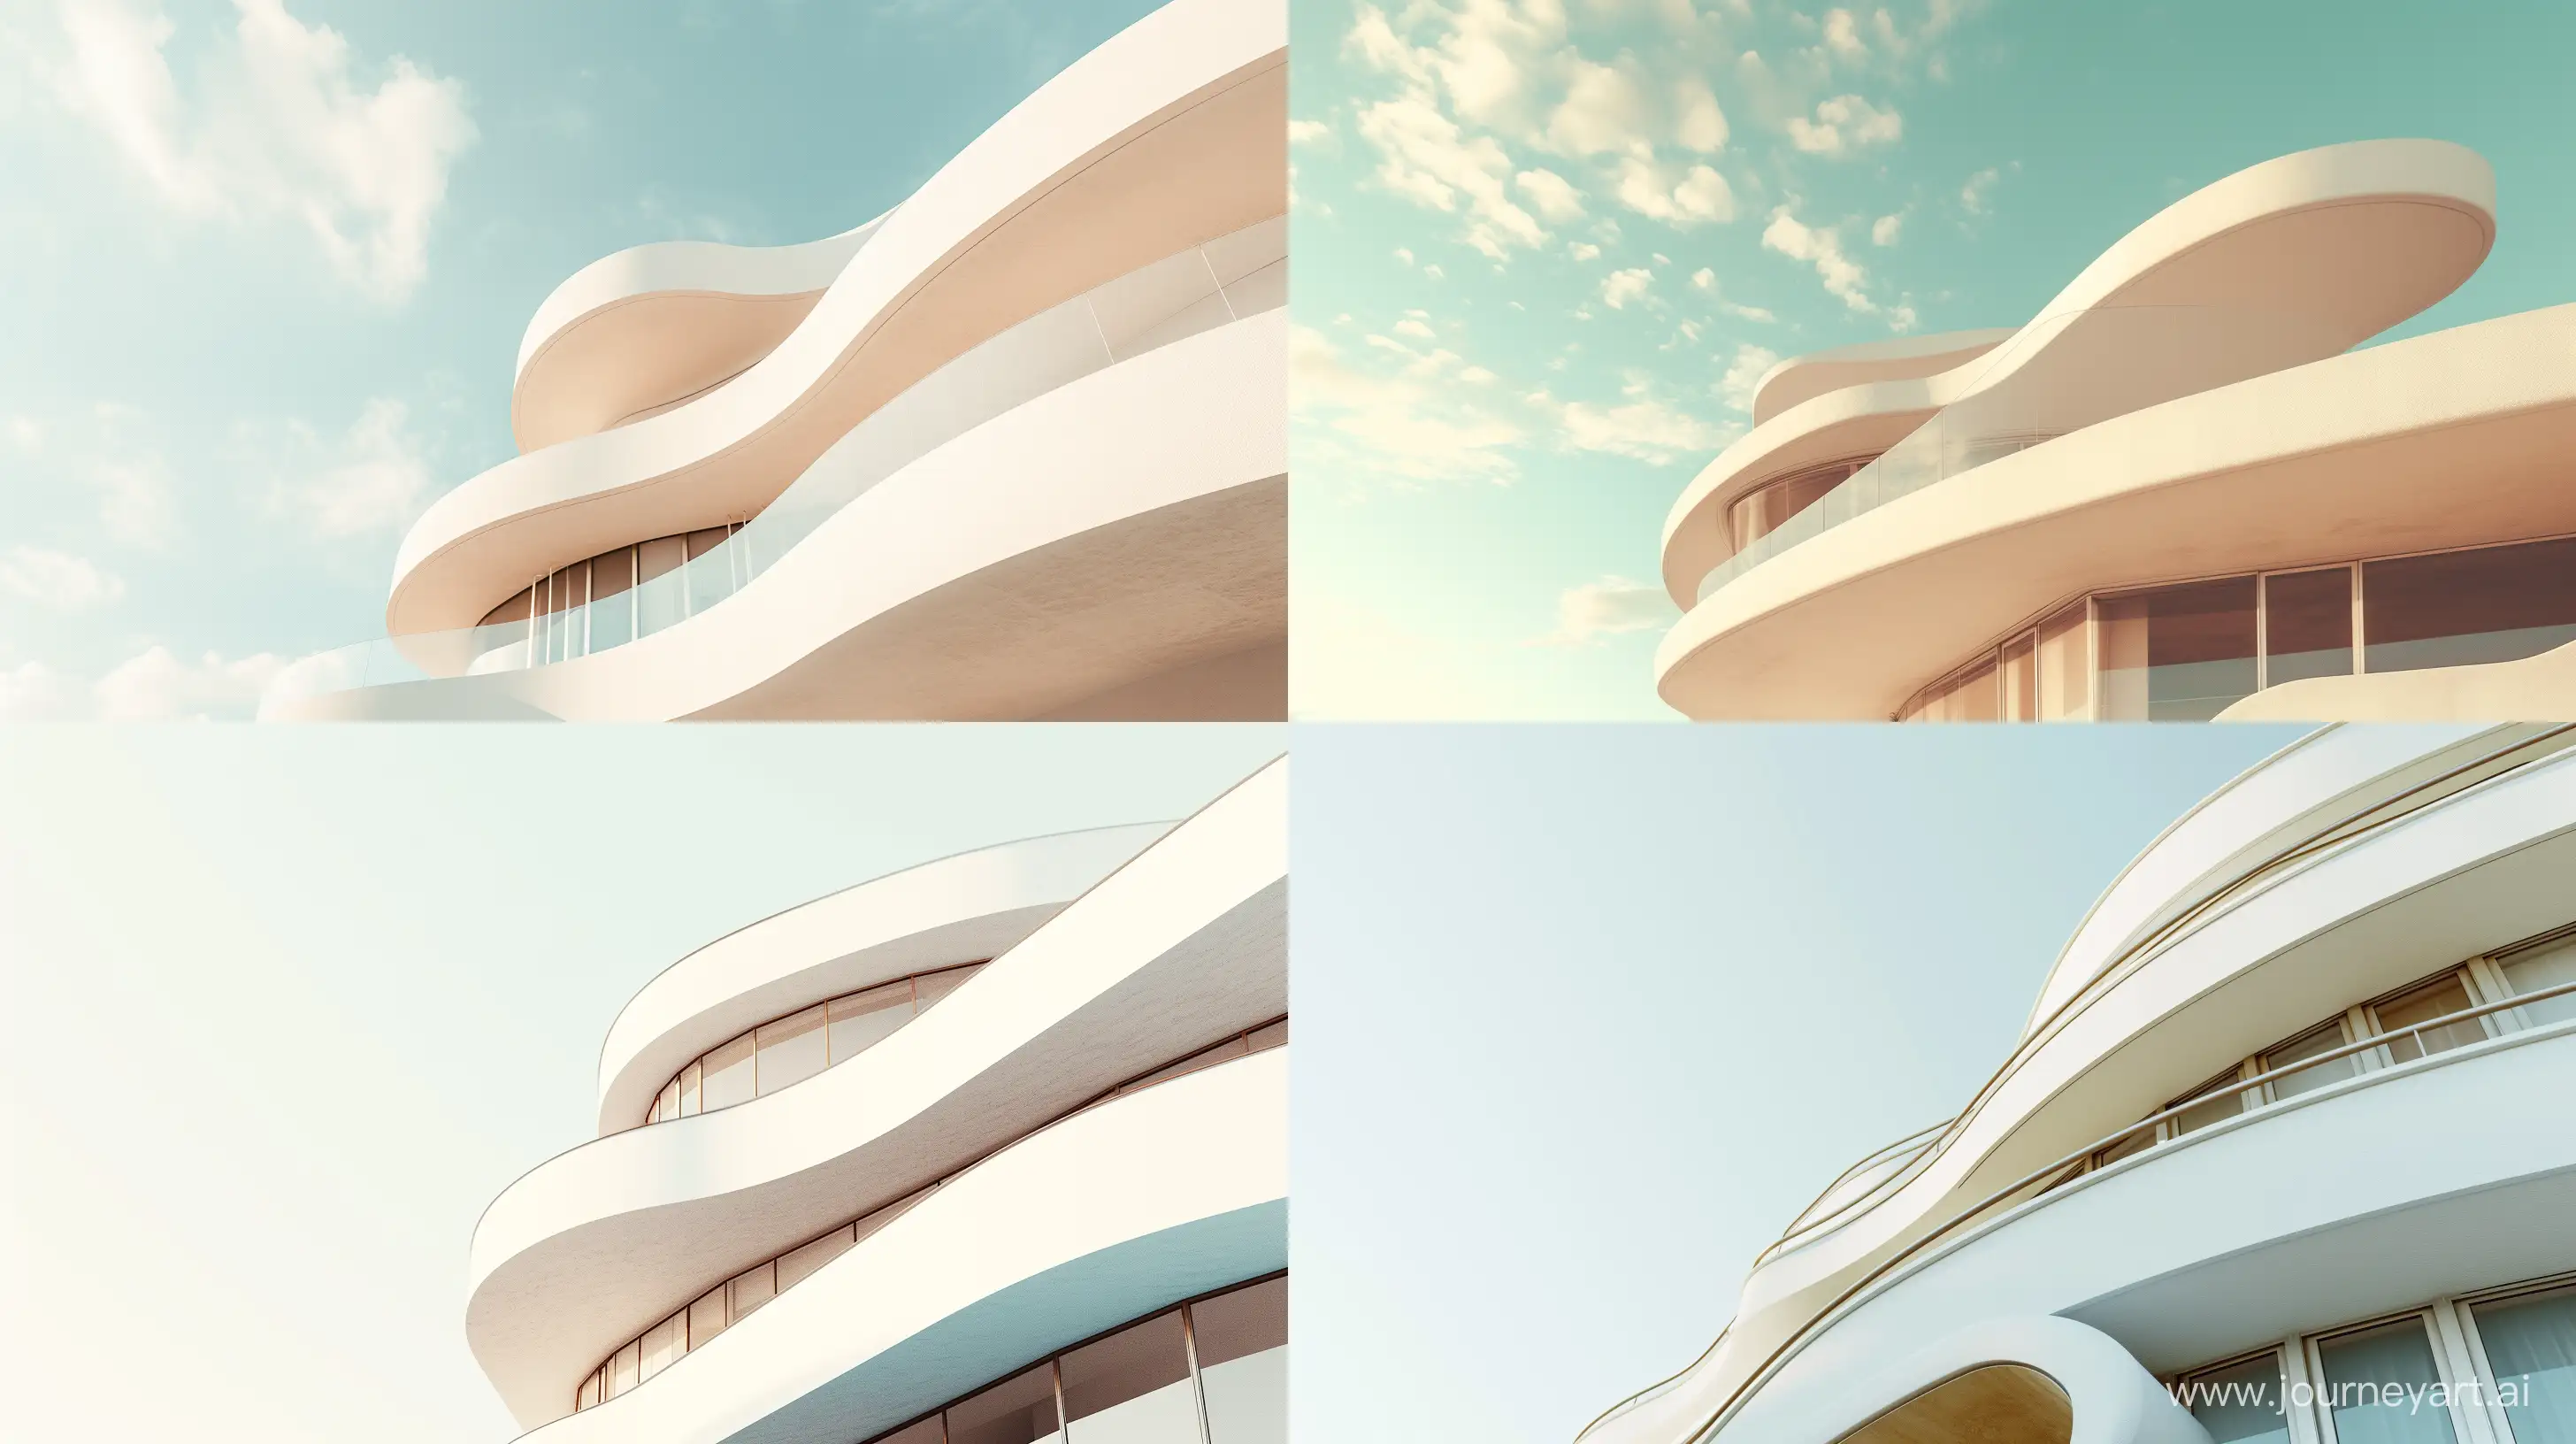 Organic-Shapes-and-Curved-Lines-in-Mycenaean-Style-Unique-Building-with-Light-SkyBlue-and-Dark-Beige-Palette